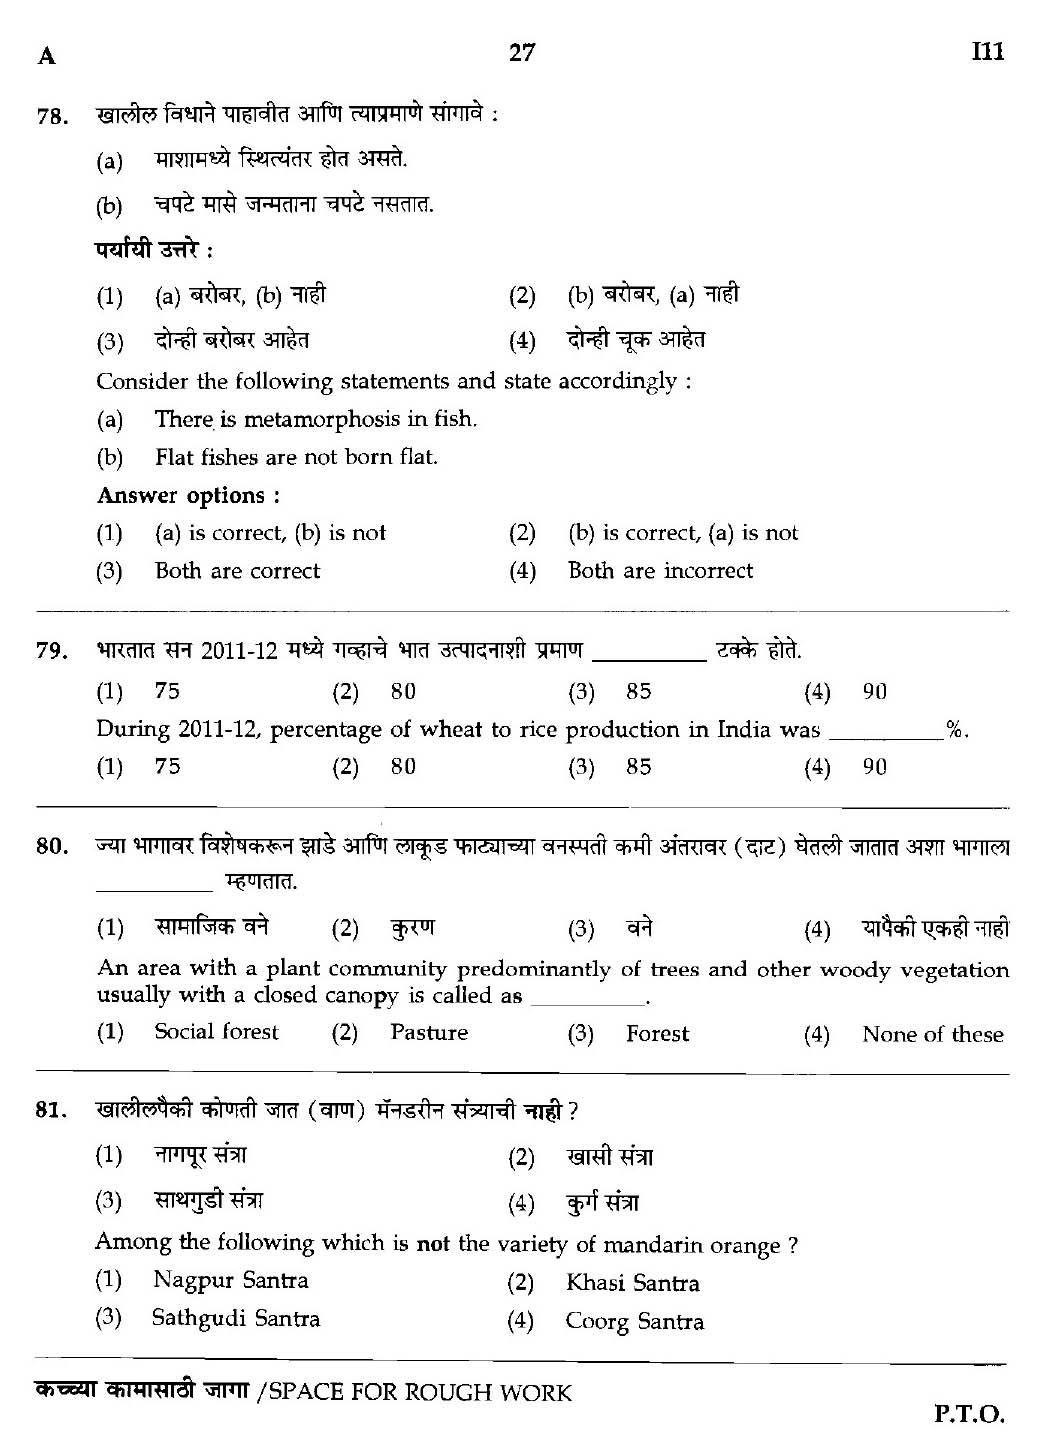 MPSC Agricultural Services Preliminary Exam 2018 Question Paper 26